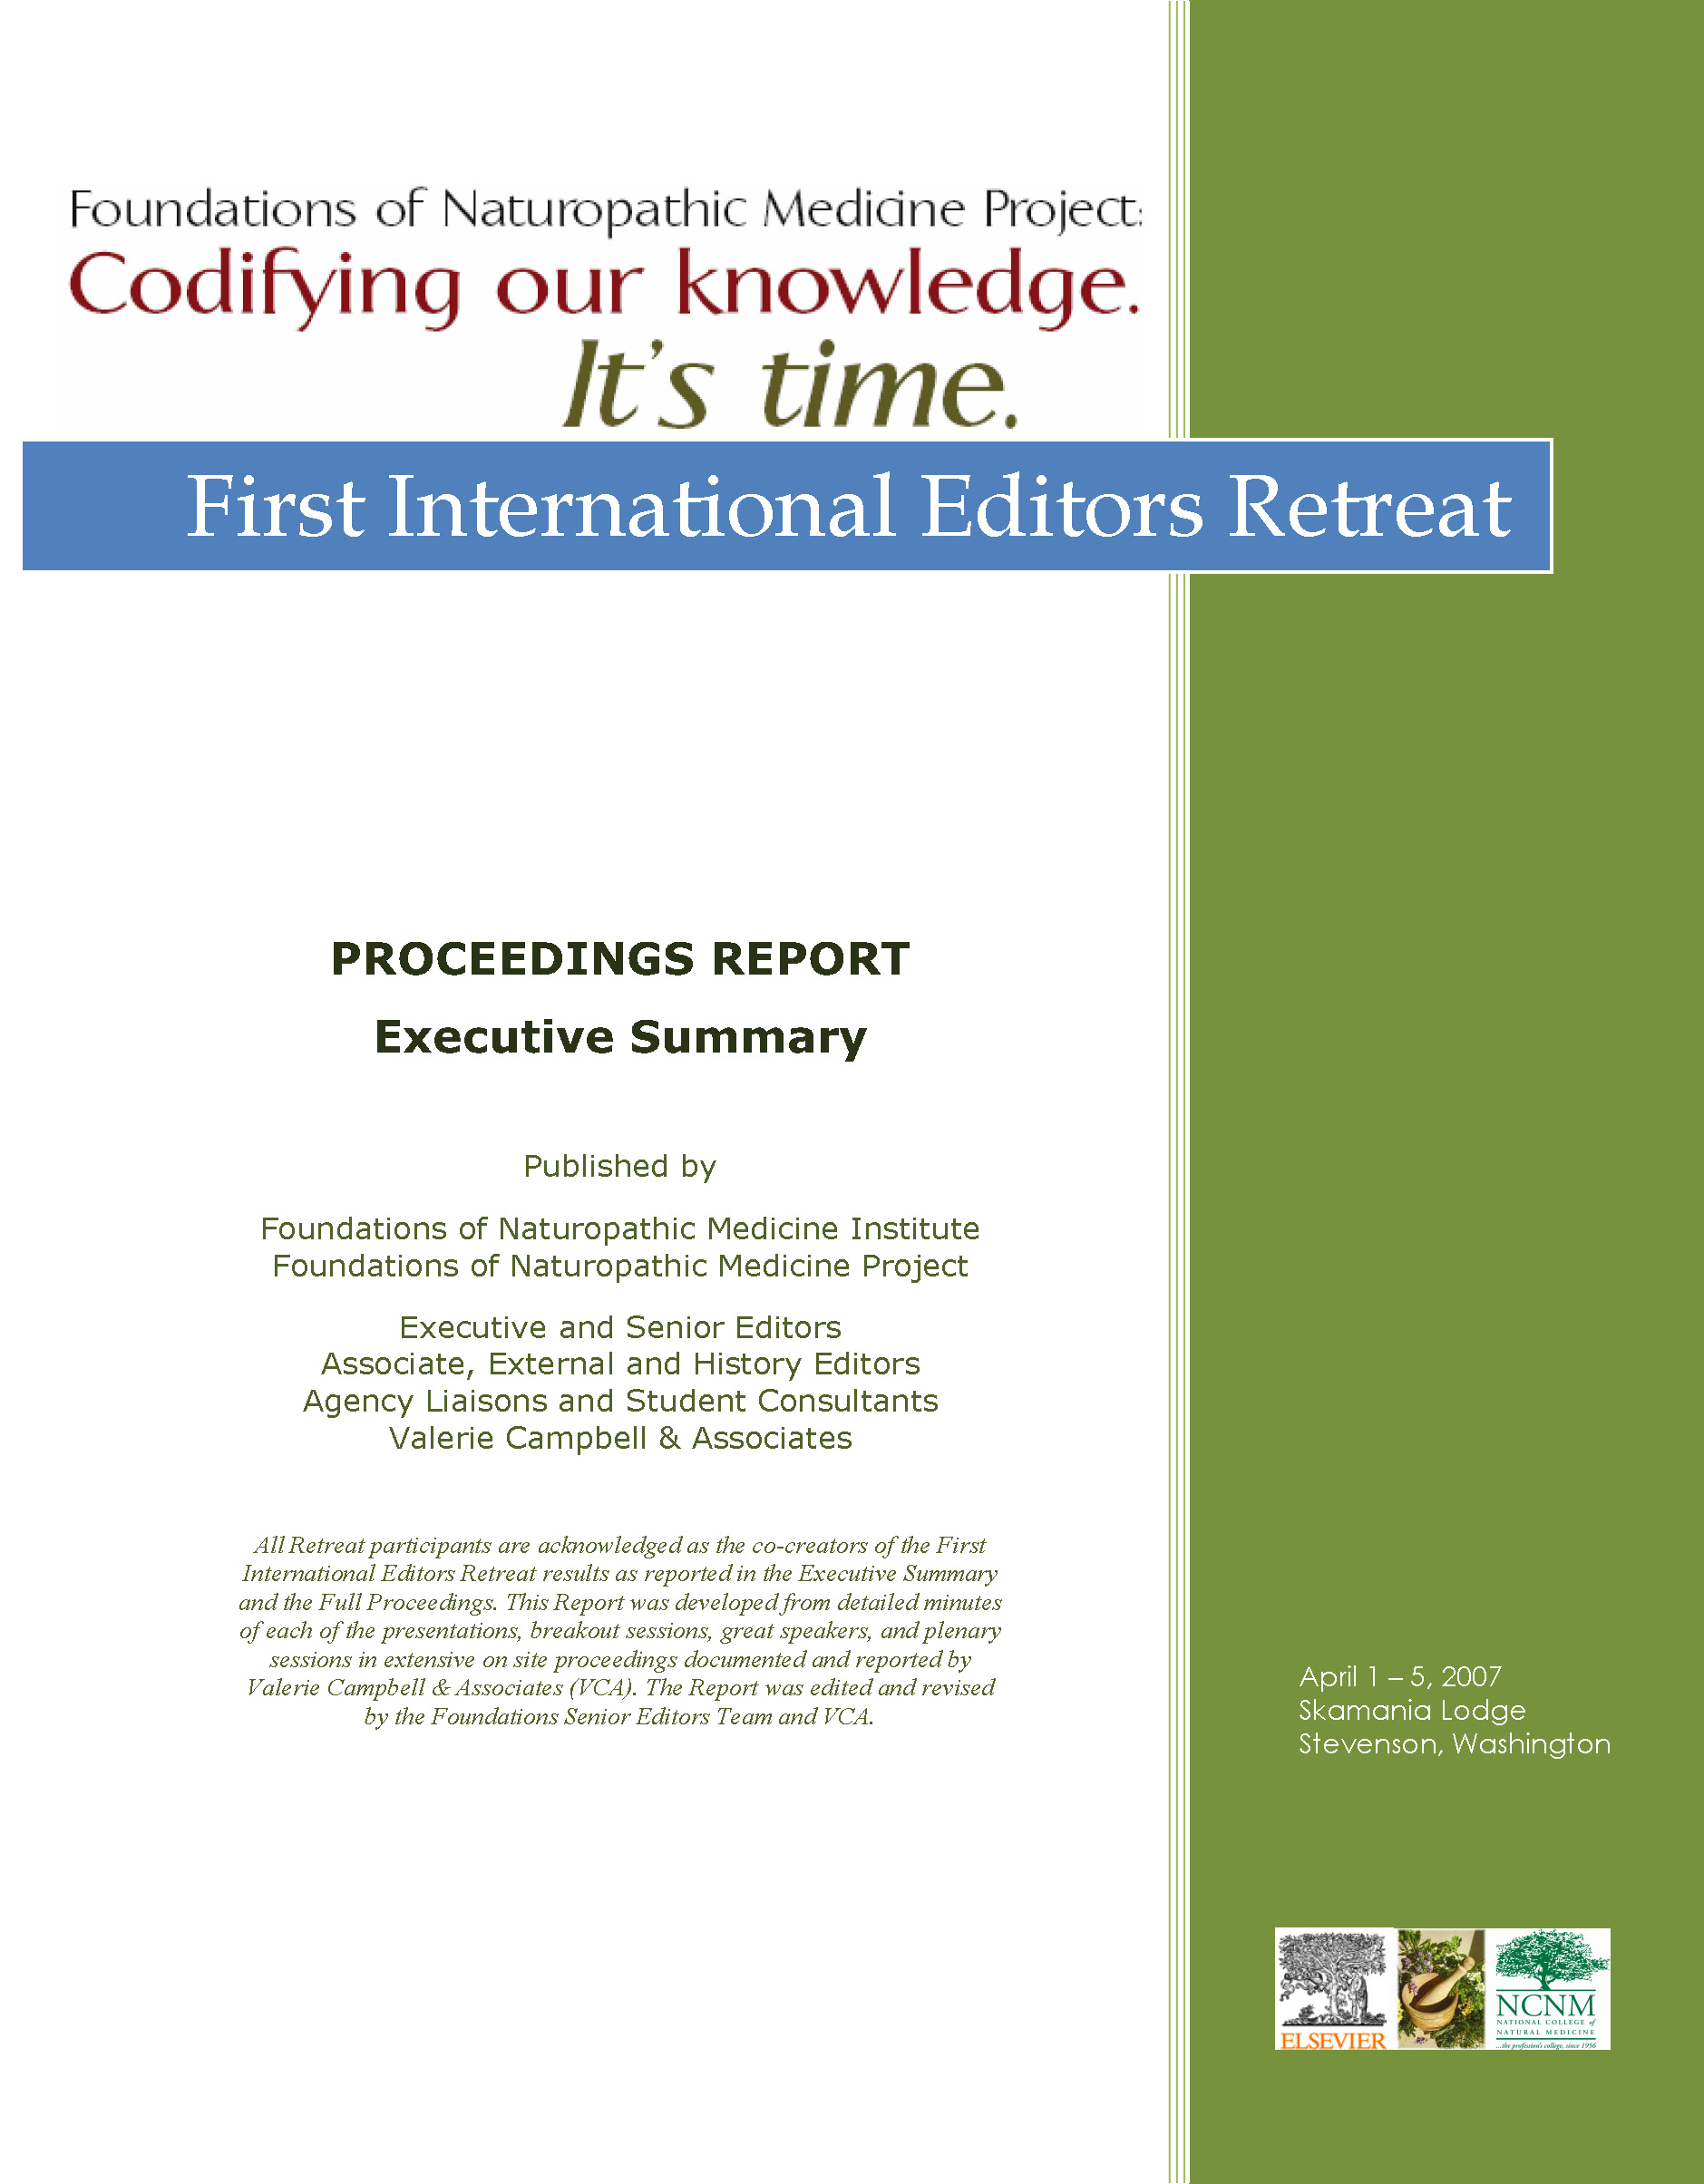 The purpose of this executive summary is to provide a brief review of the key ideas and discussion of each session of the editorial Retreat. The participants should find this to be a useful encapsulation of the Retreat. We hope that this document will help ensure a general understanding of the participants’ extensive contributions, which are detailed elsewhere.